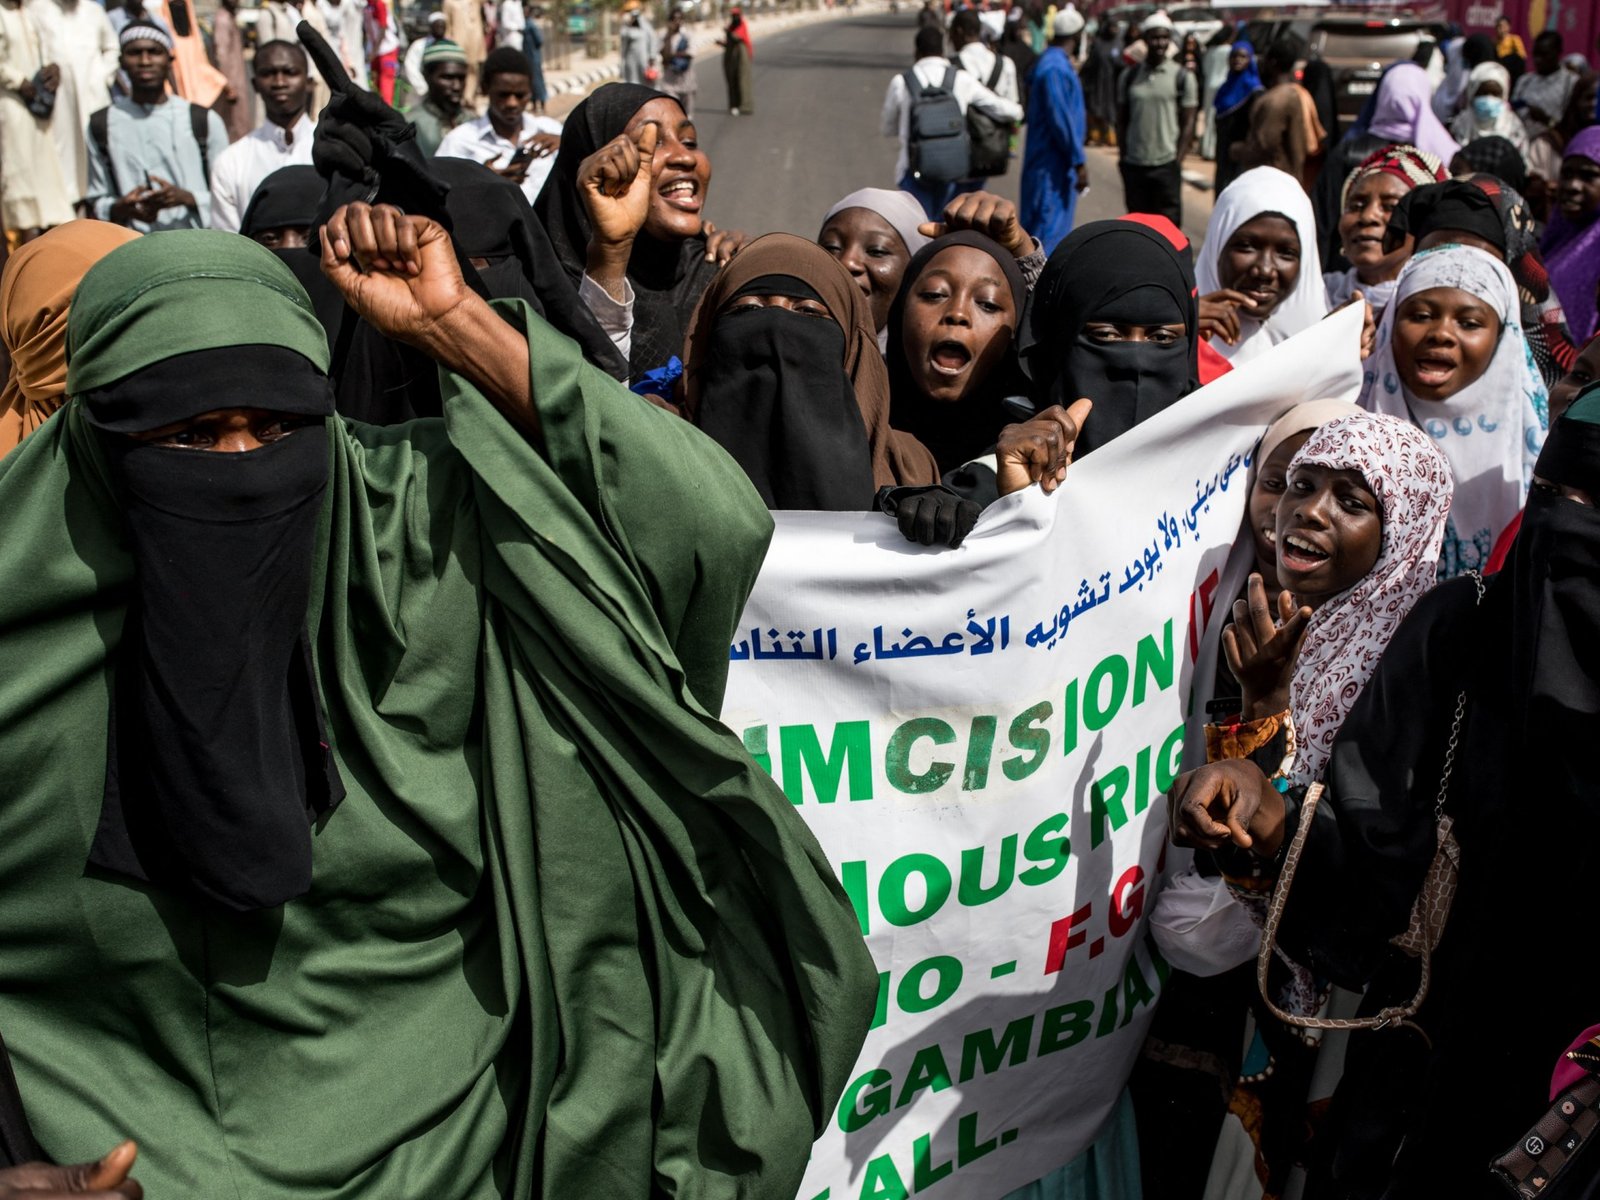 The Gambia votes to reverse landmark ban on female genital mutilation | Women’s Rights News